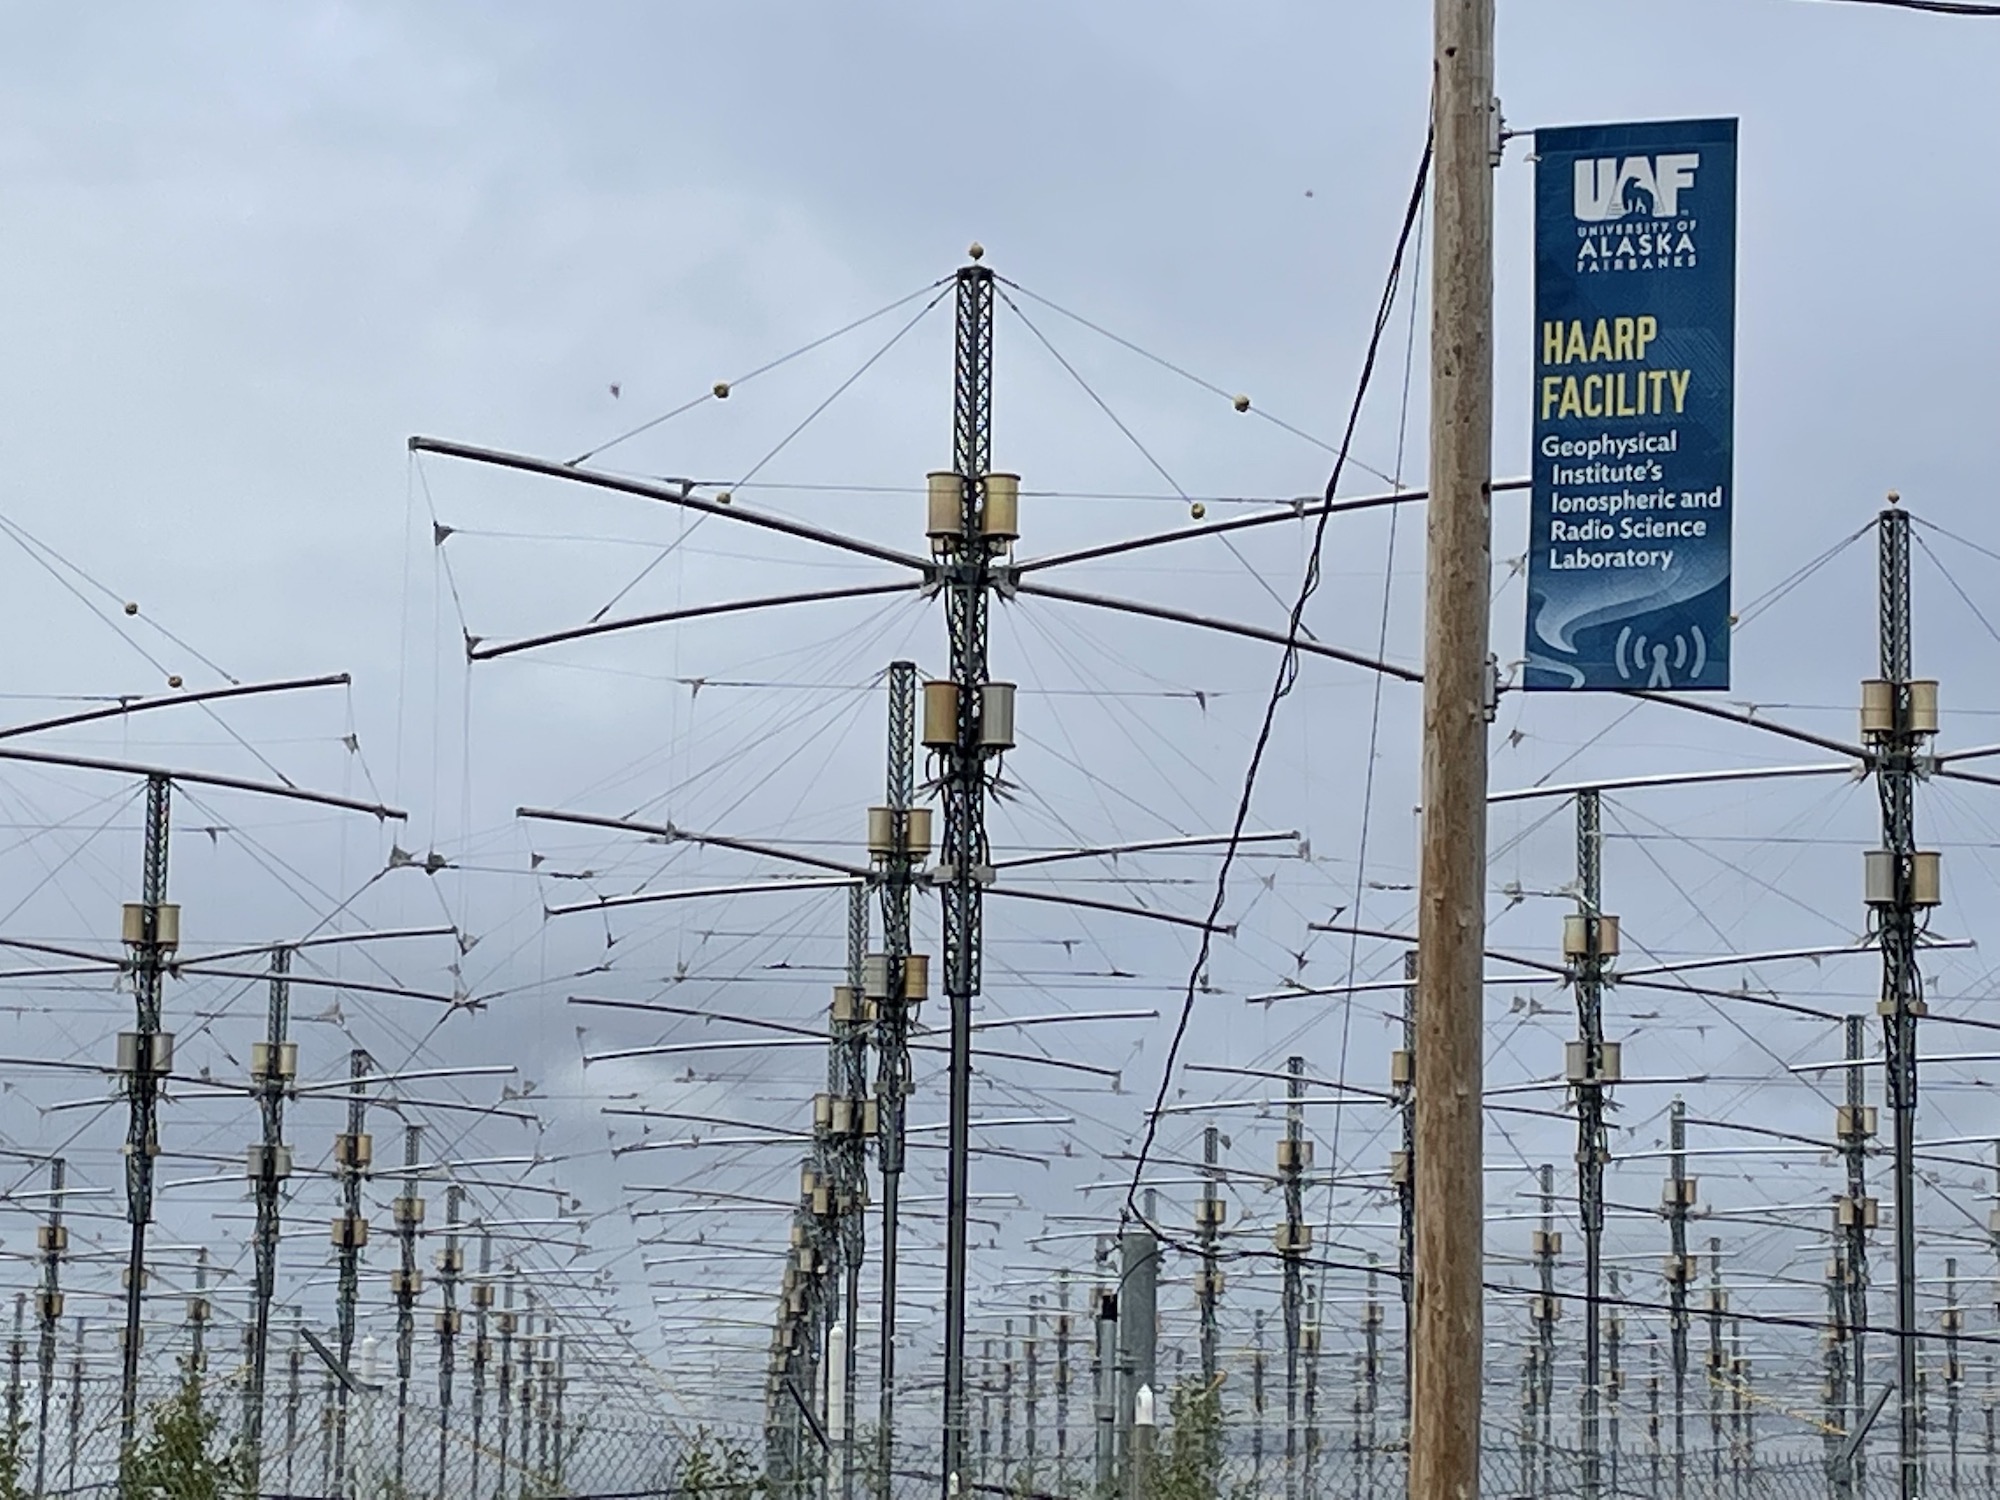 Antenna wires suspended from metal posts are outlined against the sky, while a banner mounted on from a wooden power pole identifies the location as the UAF Geophysical Institute's HAARP facility.